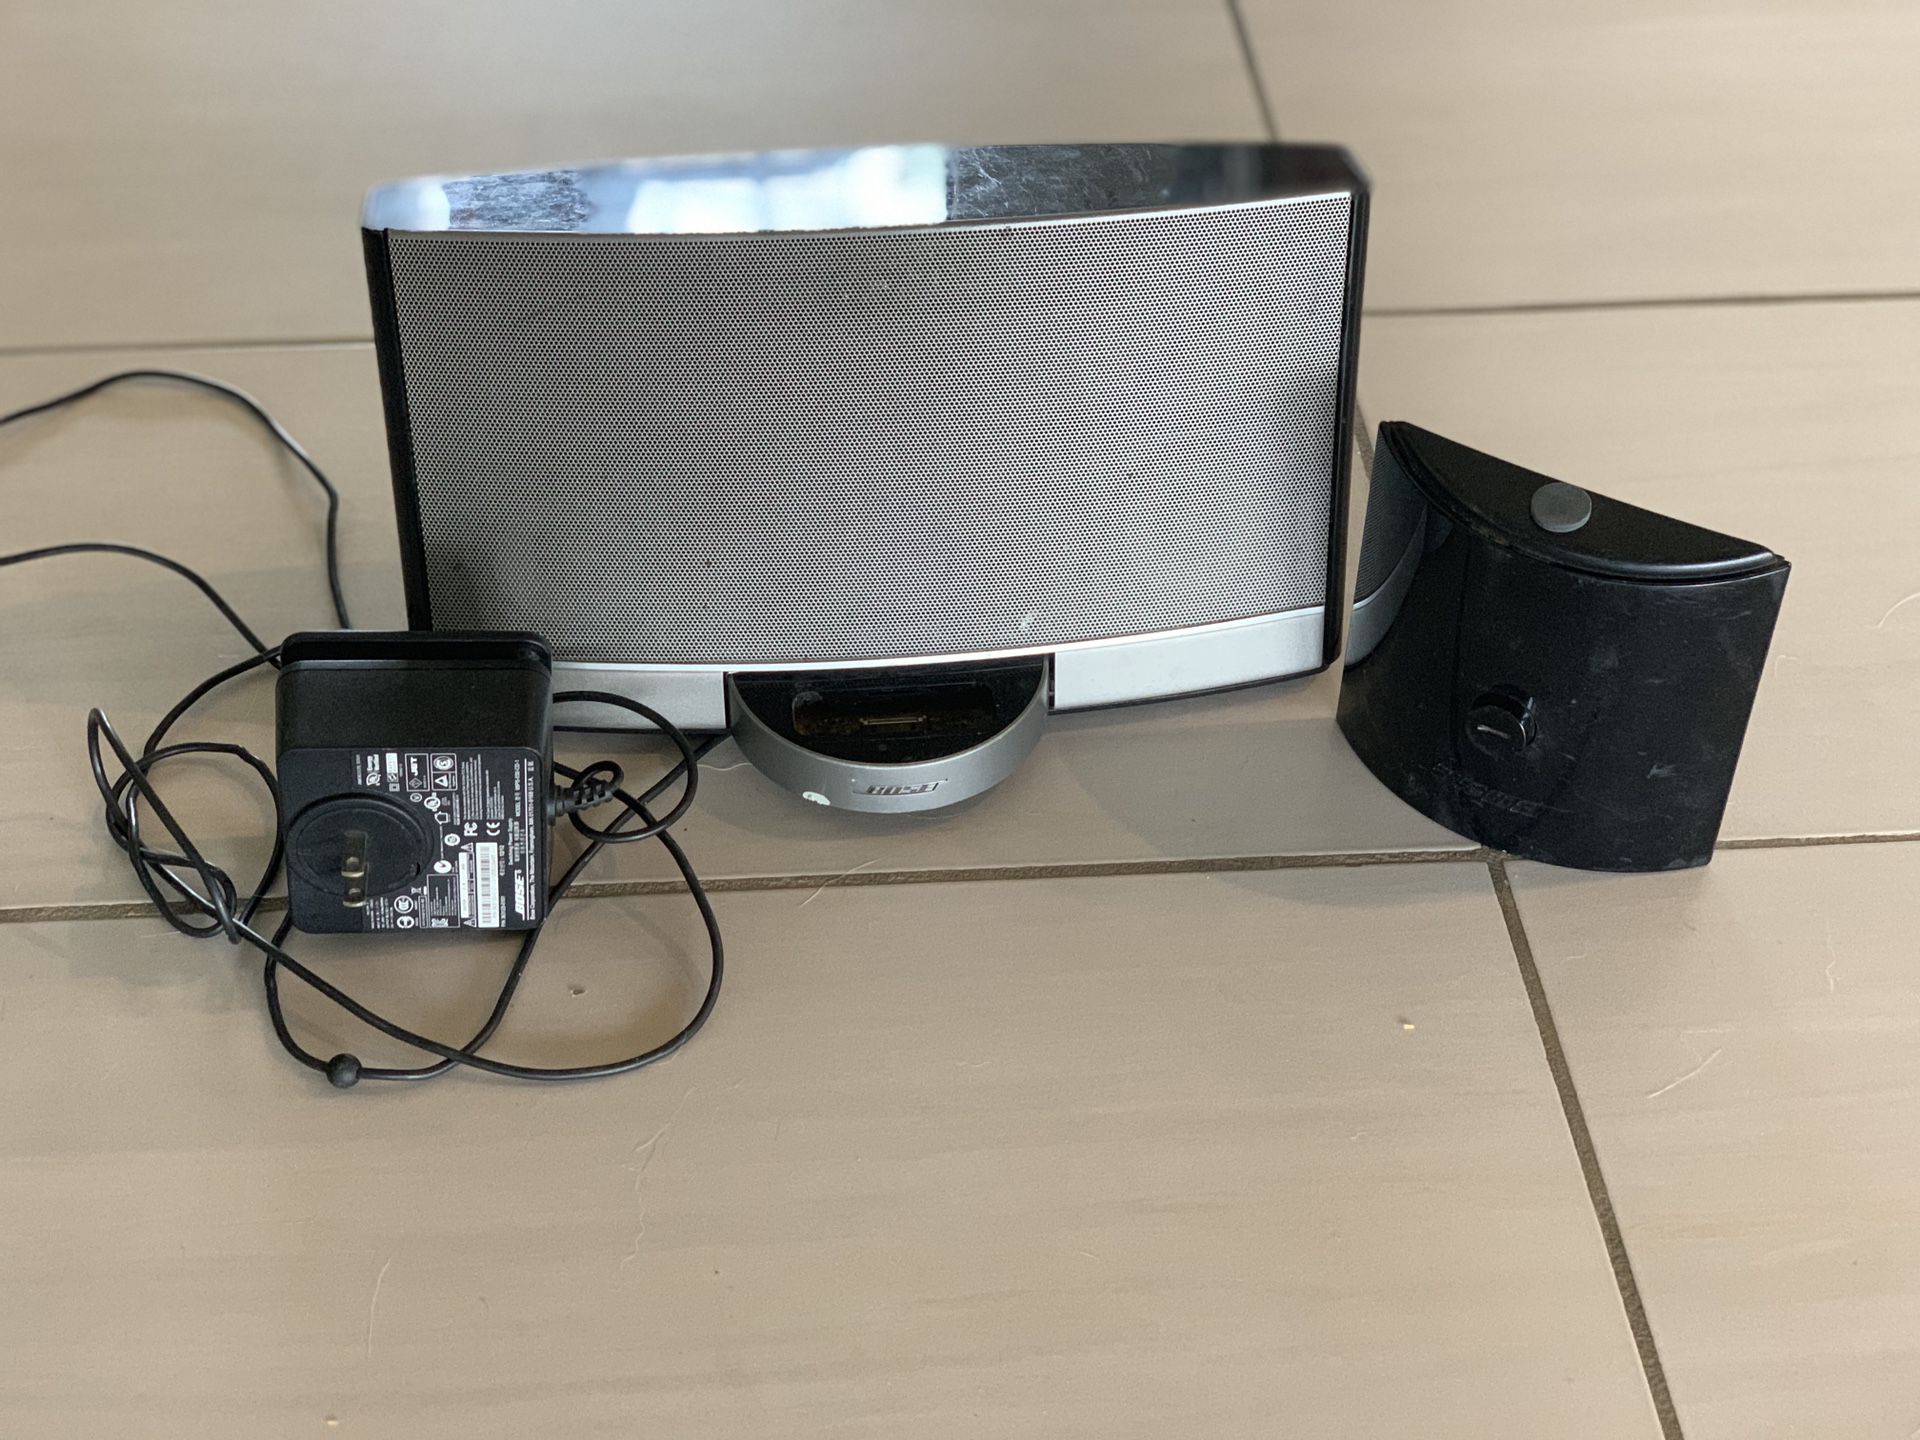 Bose sound deck with extra battery pack